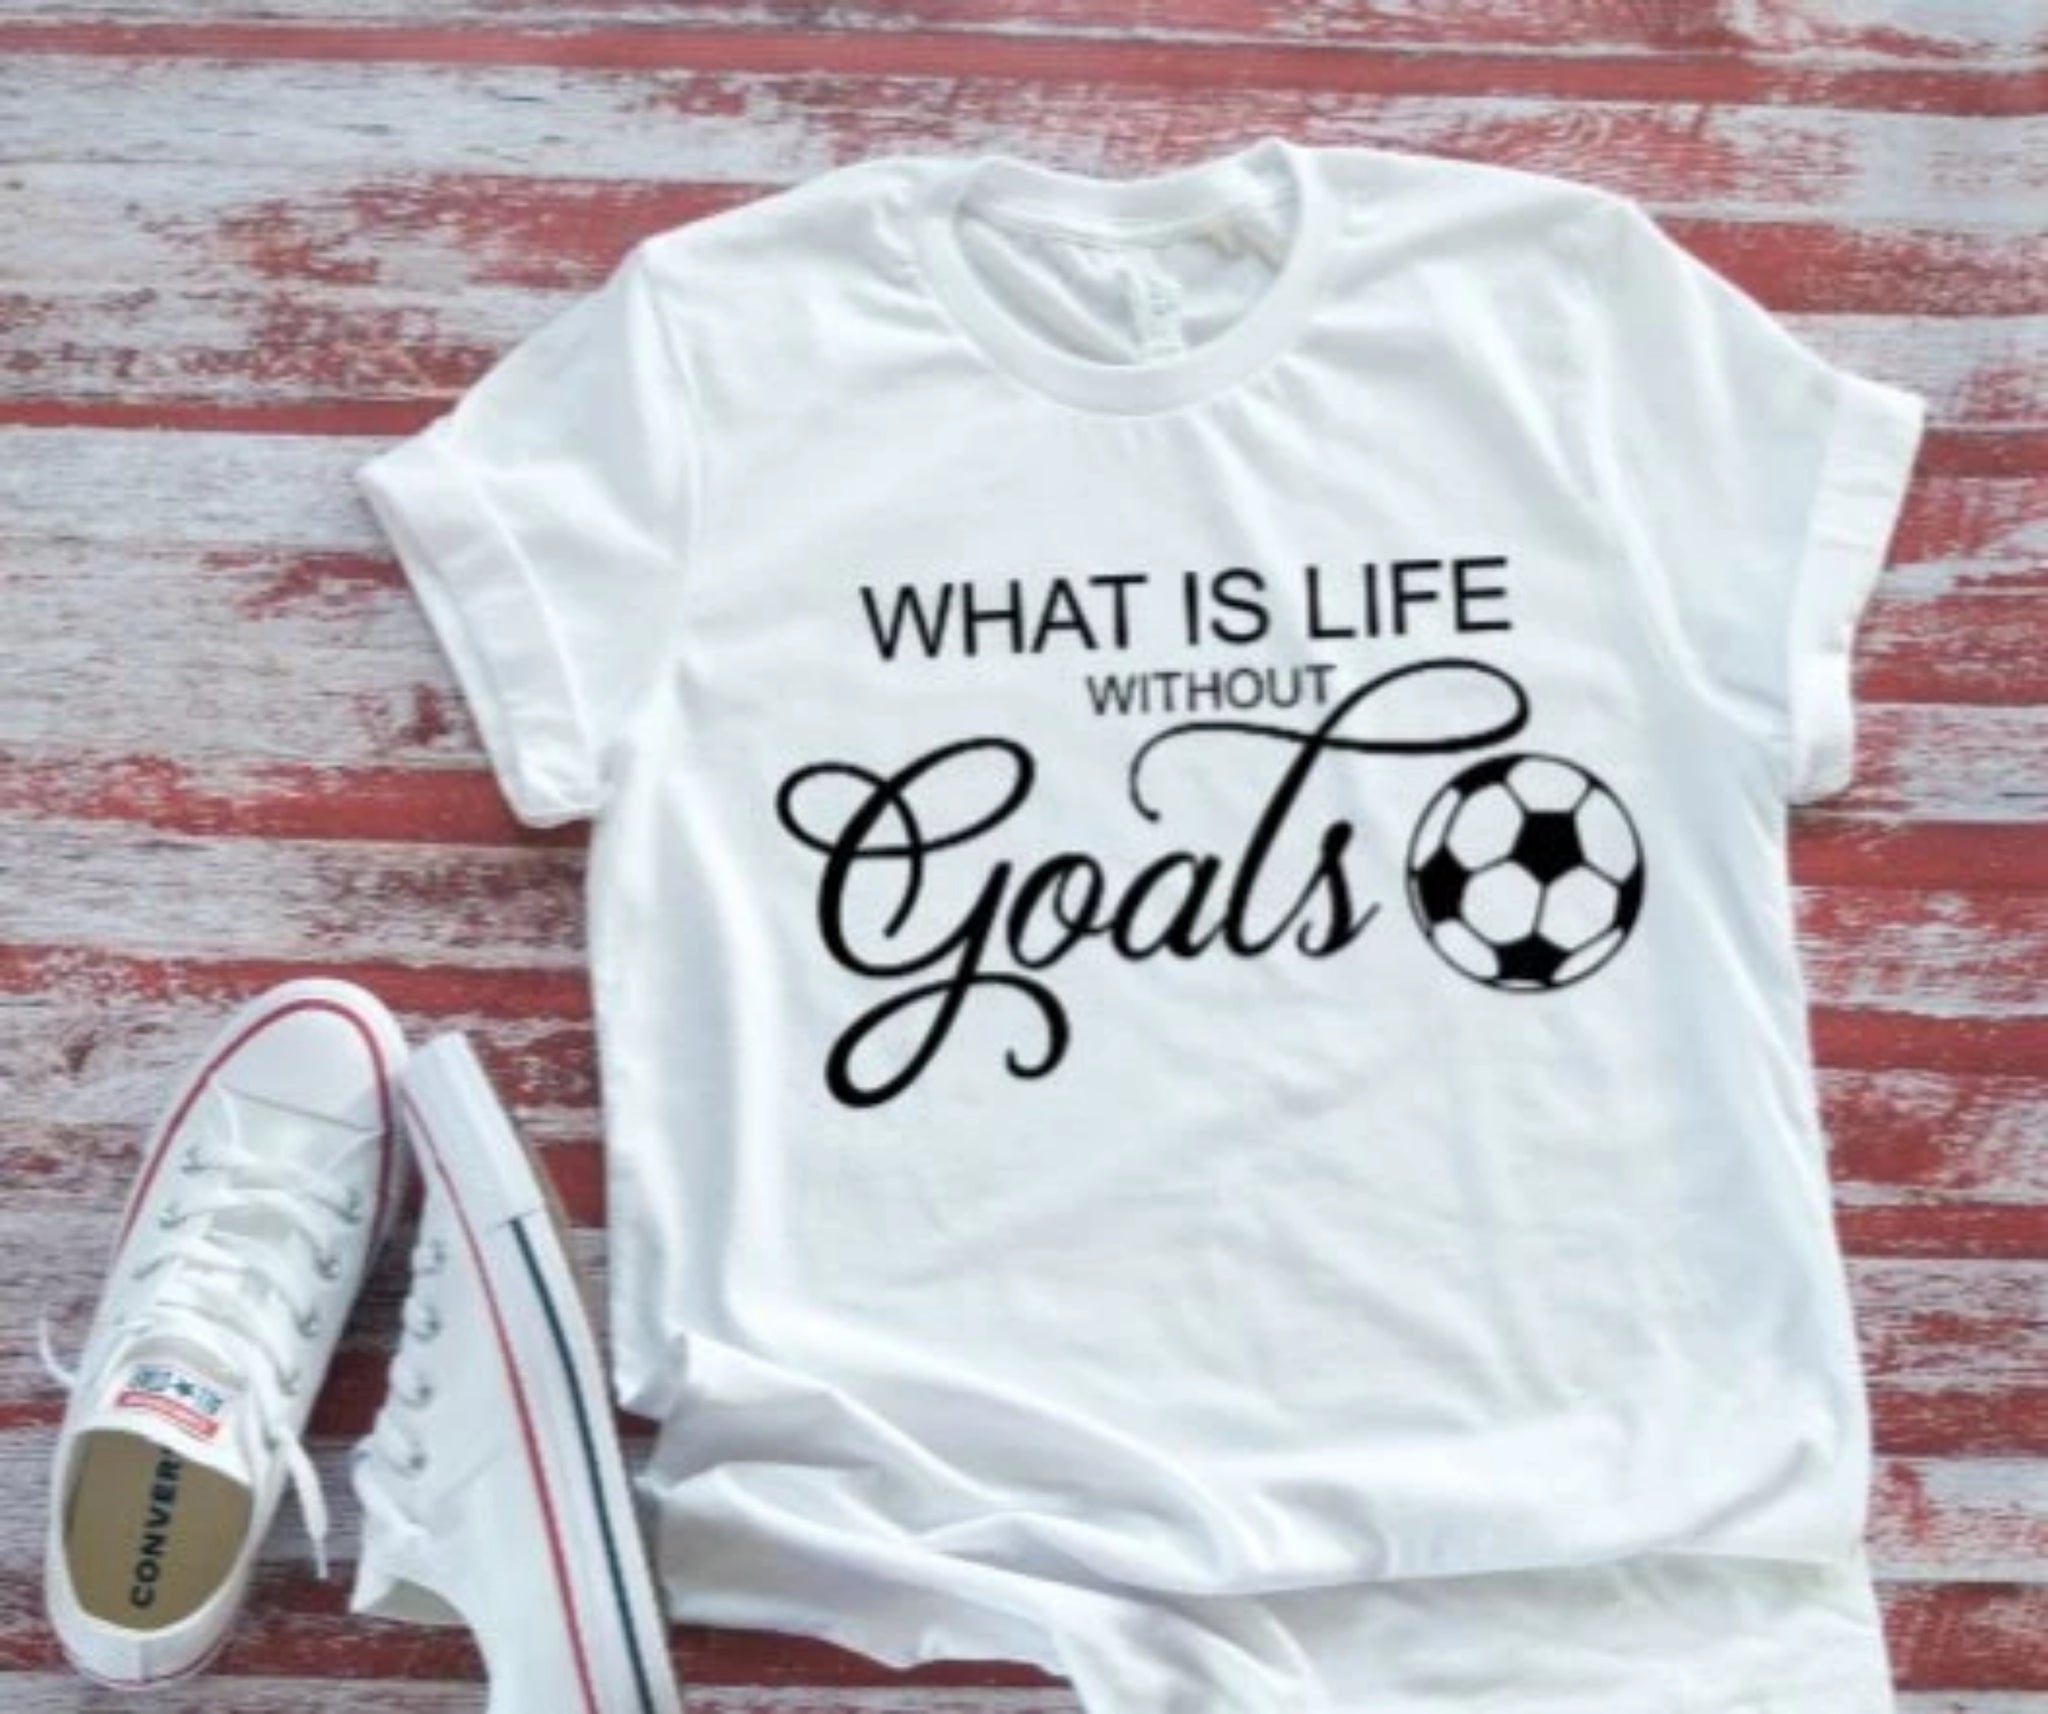 What is Life Without Goals, Soccer White Short Sleeve T-shirt